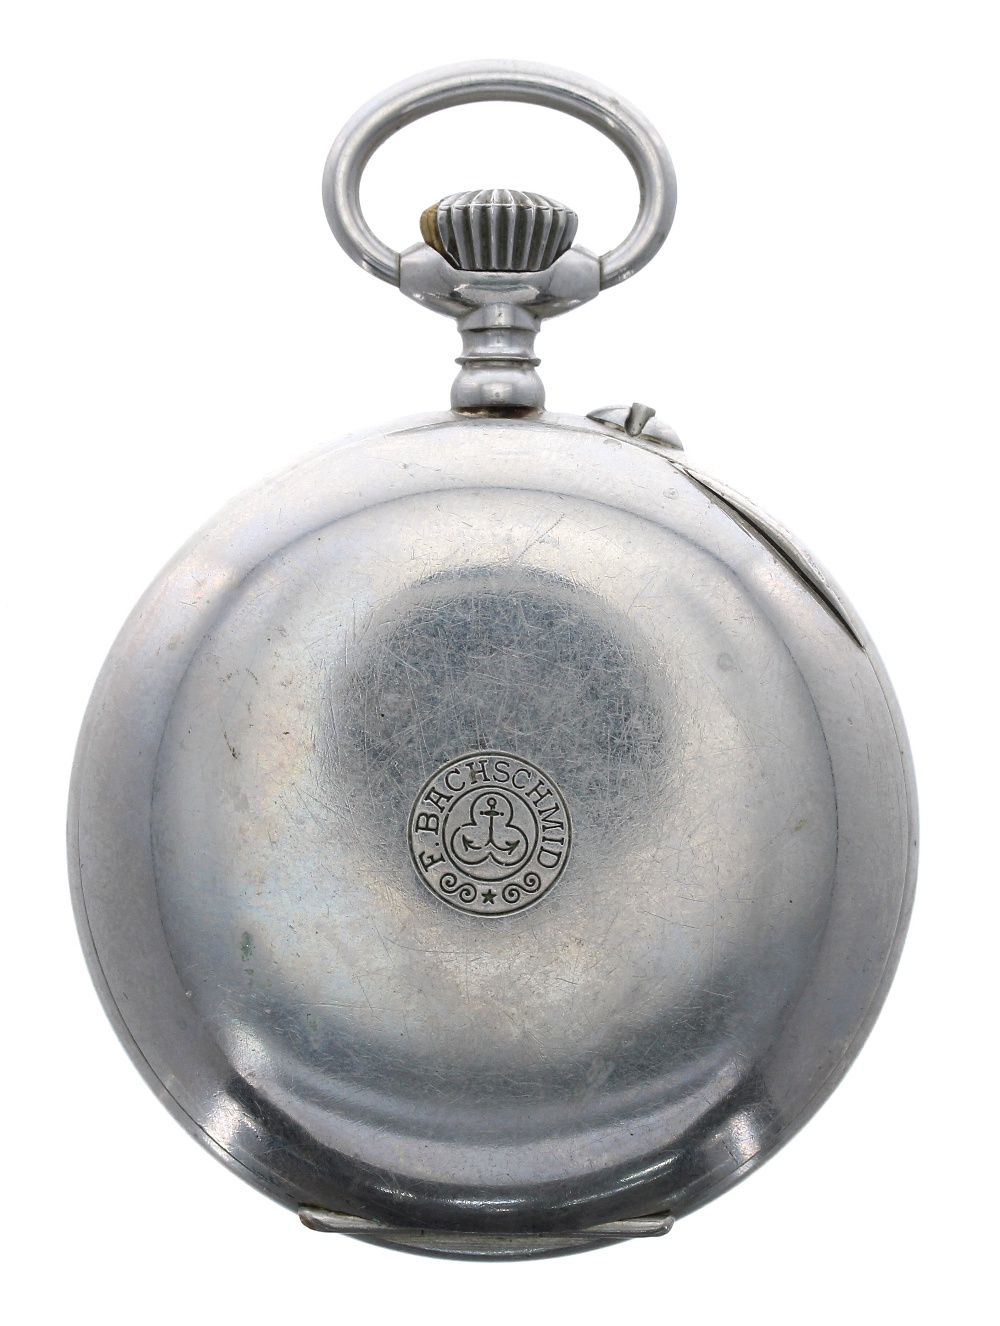 F. Bachschmid Patent centre second nickel cased lever pocket watch, signed gilt frosted movement - Image 2 of 3